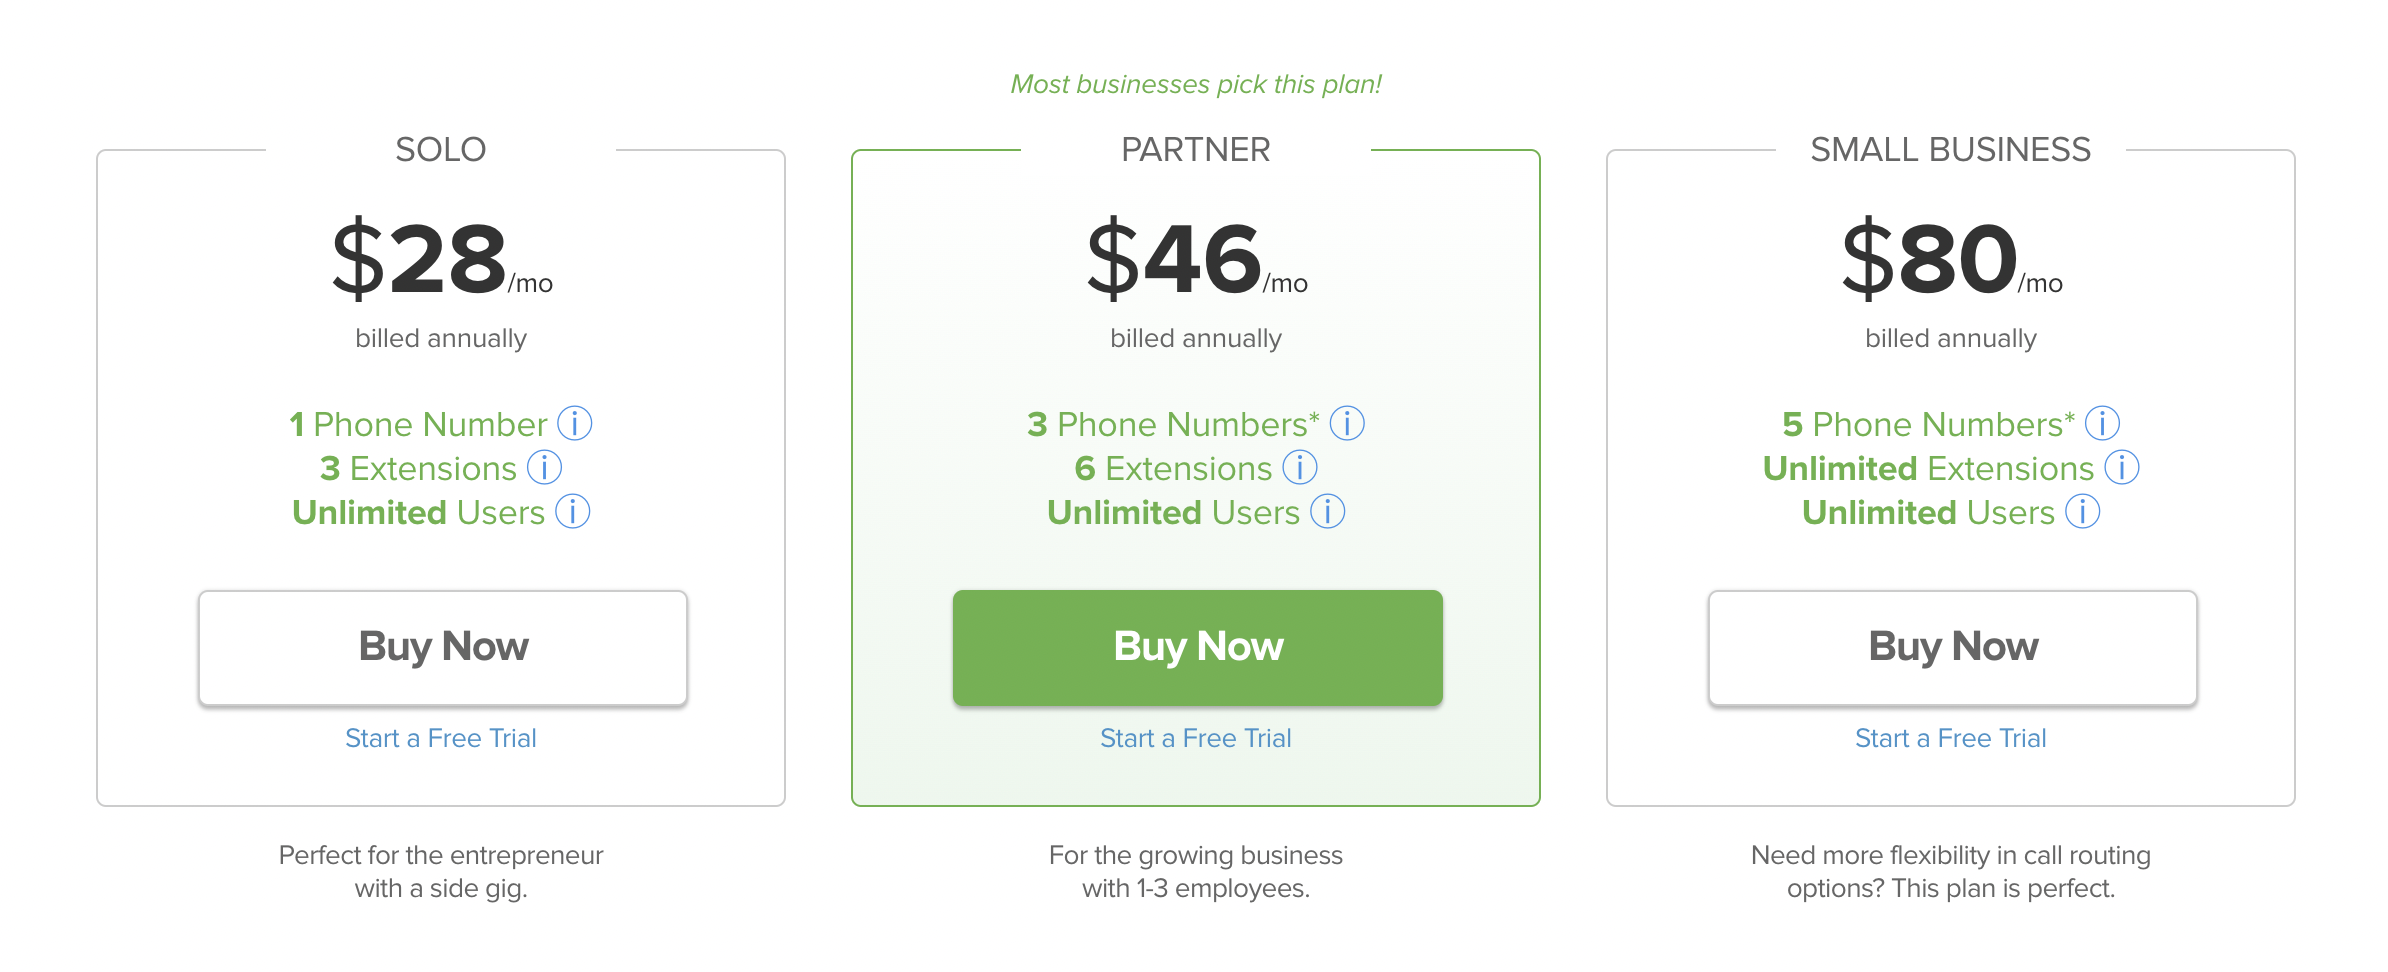 Small business cell phone plans: Grasshopper pricing